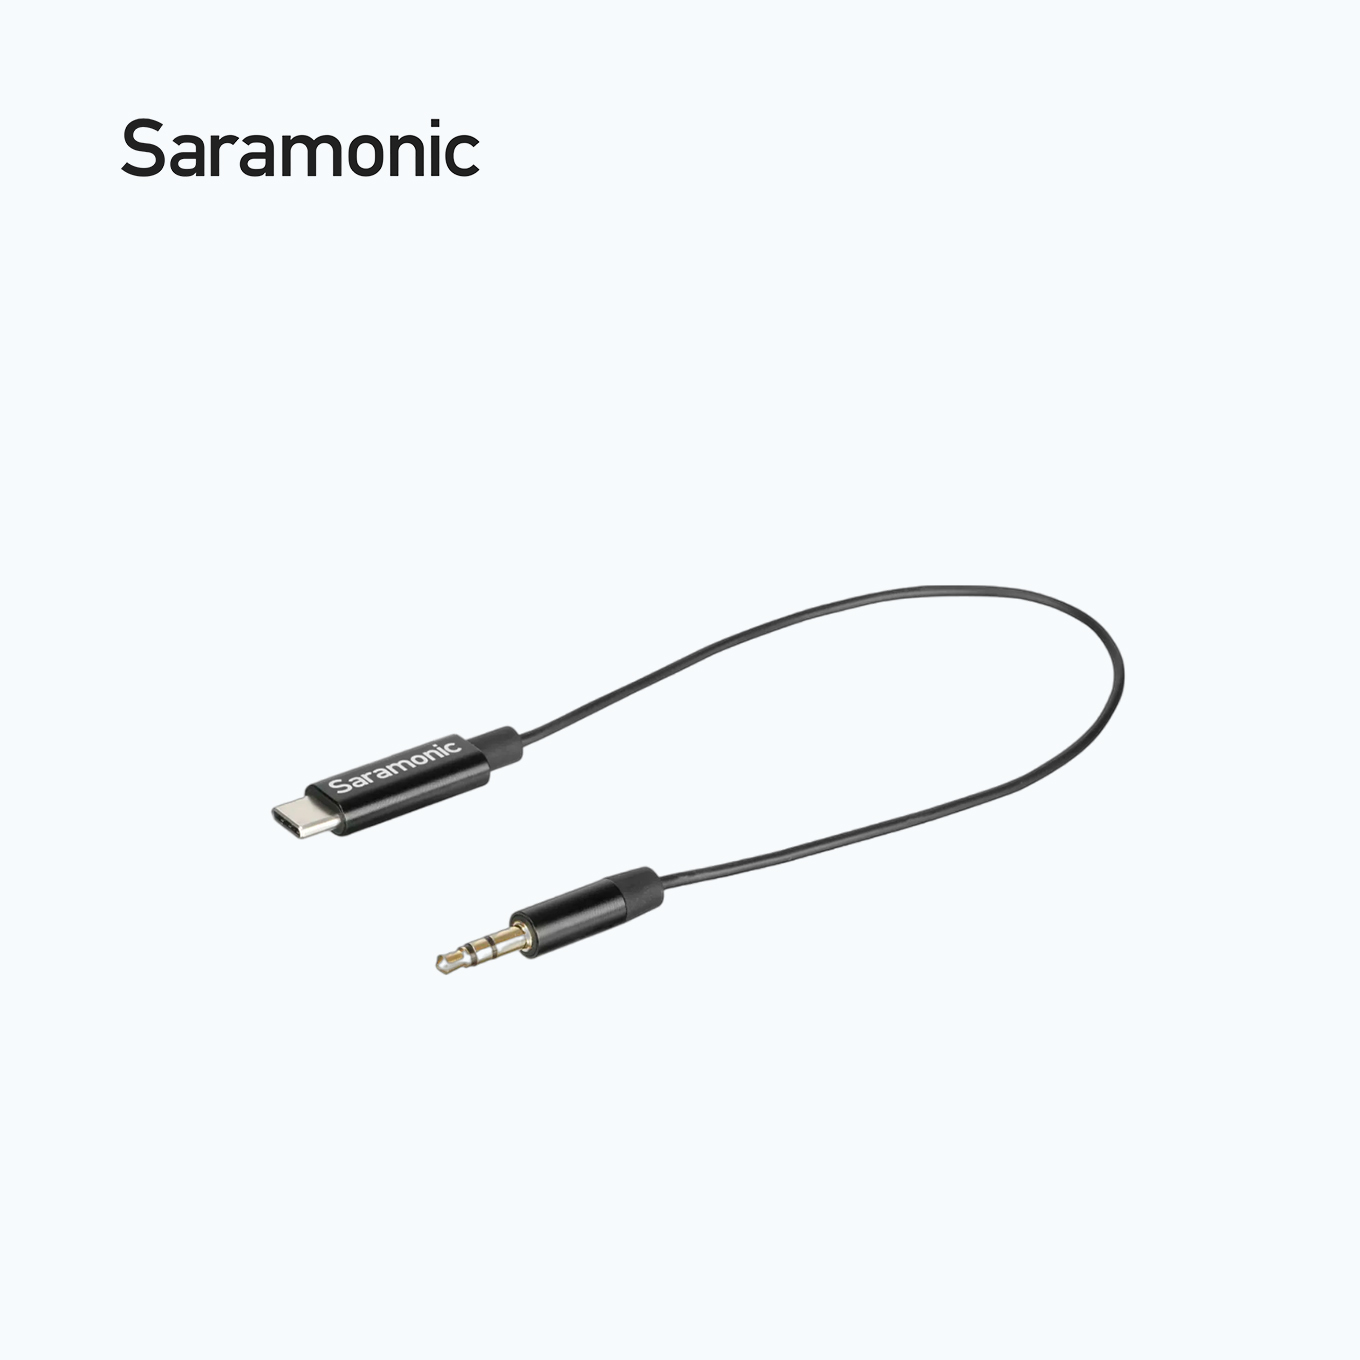 Saramonic 3.5mm TRS Male Jack Adapter Cable 